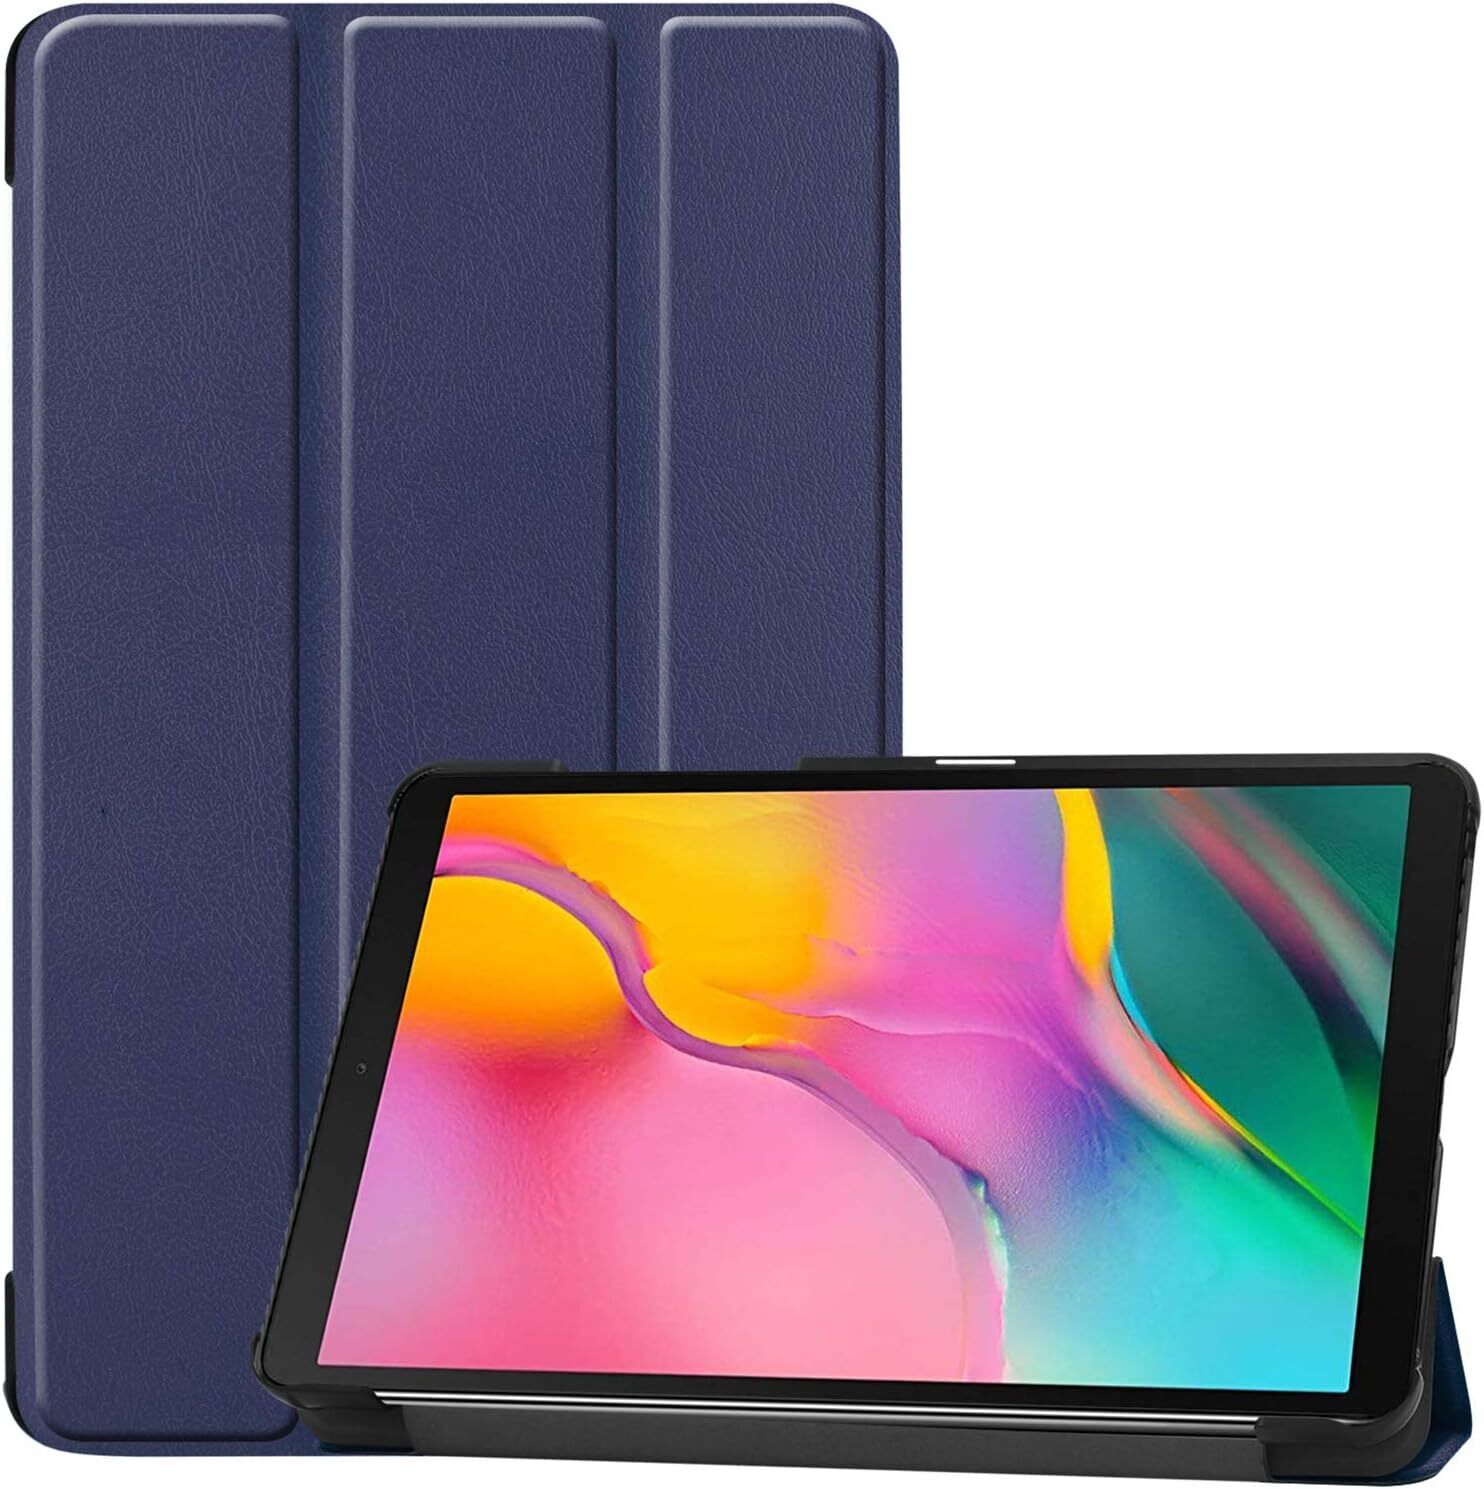 Shockproof PU Leather Stand Slim Case For Samsung Galaxy Tab A 8.0 2019 SM-T290